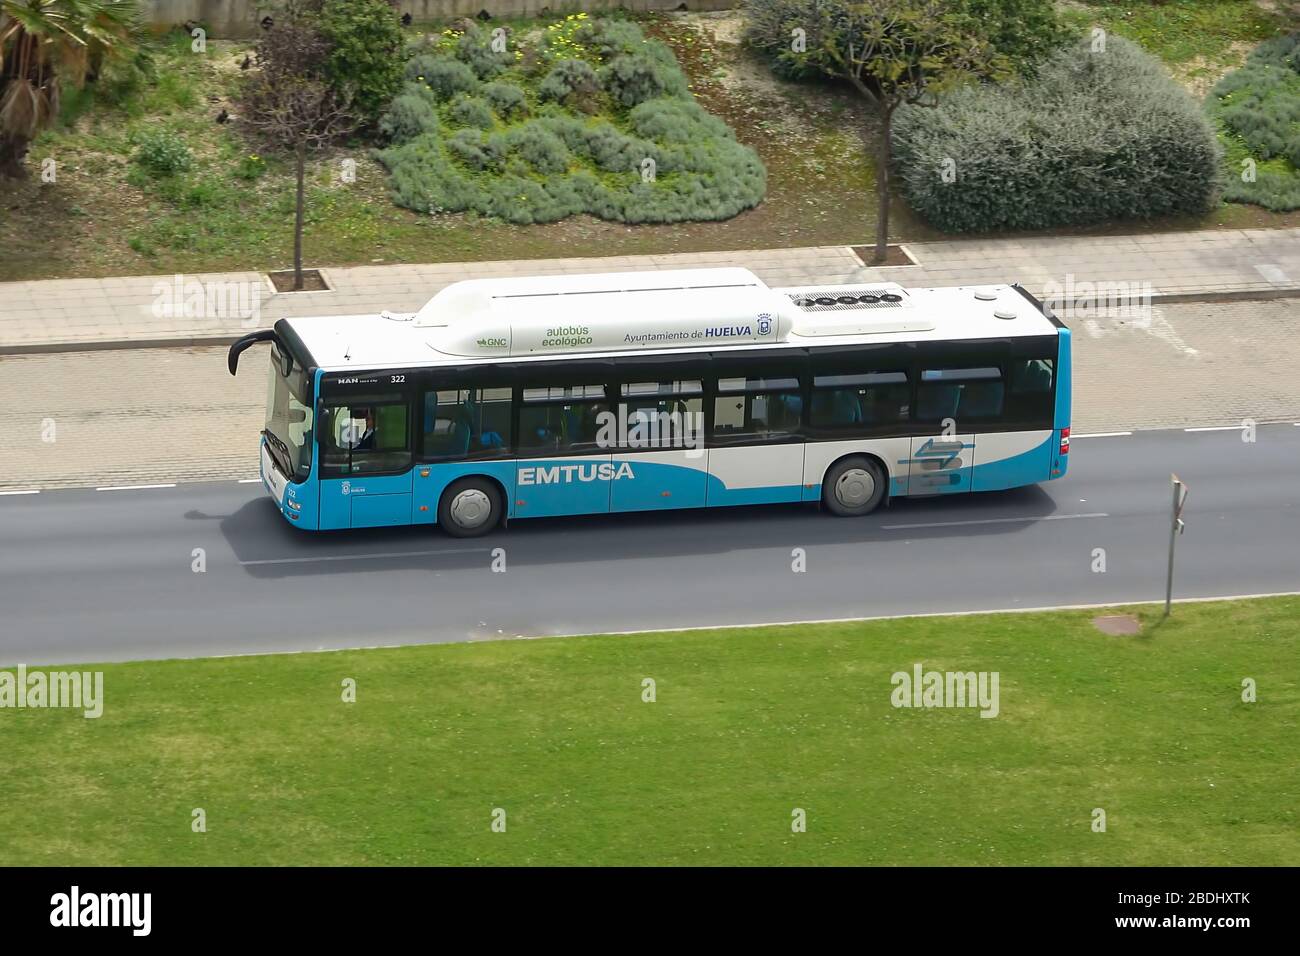 Huelva, Spain - April 6, 2020: Bus from public company EMTUSA moving on the road and going to HOLEA Mall during Spanish lockdown due to Covid-19 Coron Stock Photo